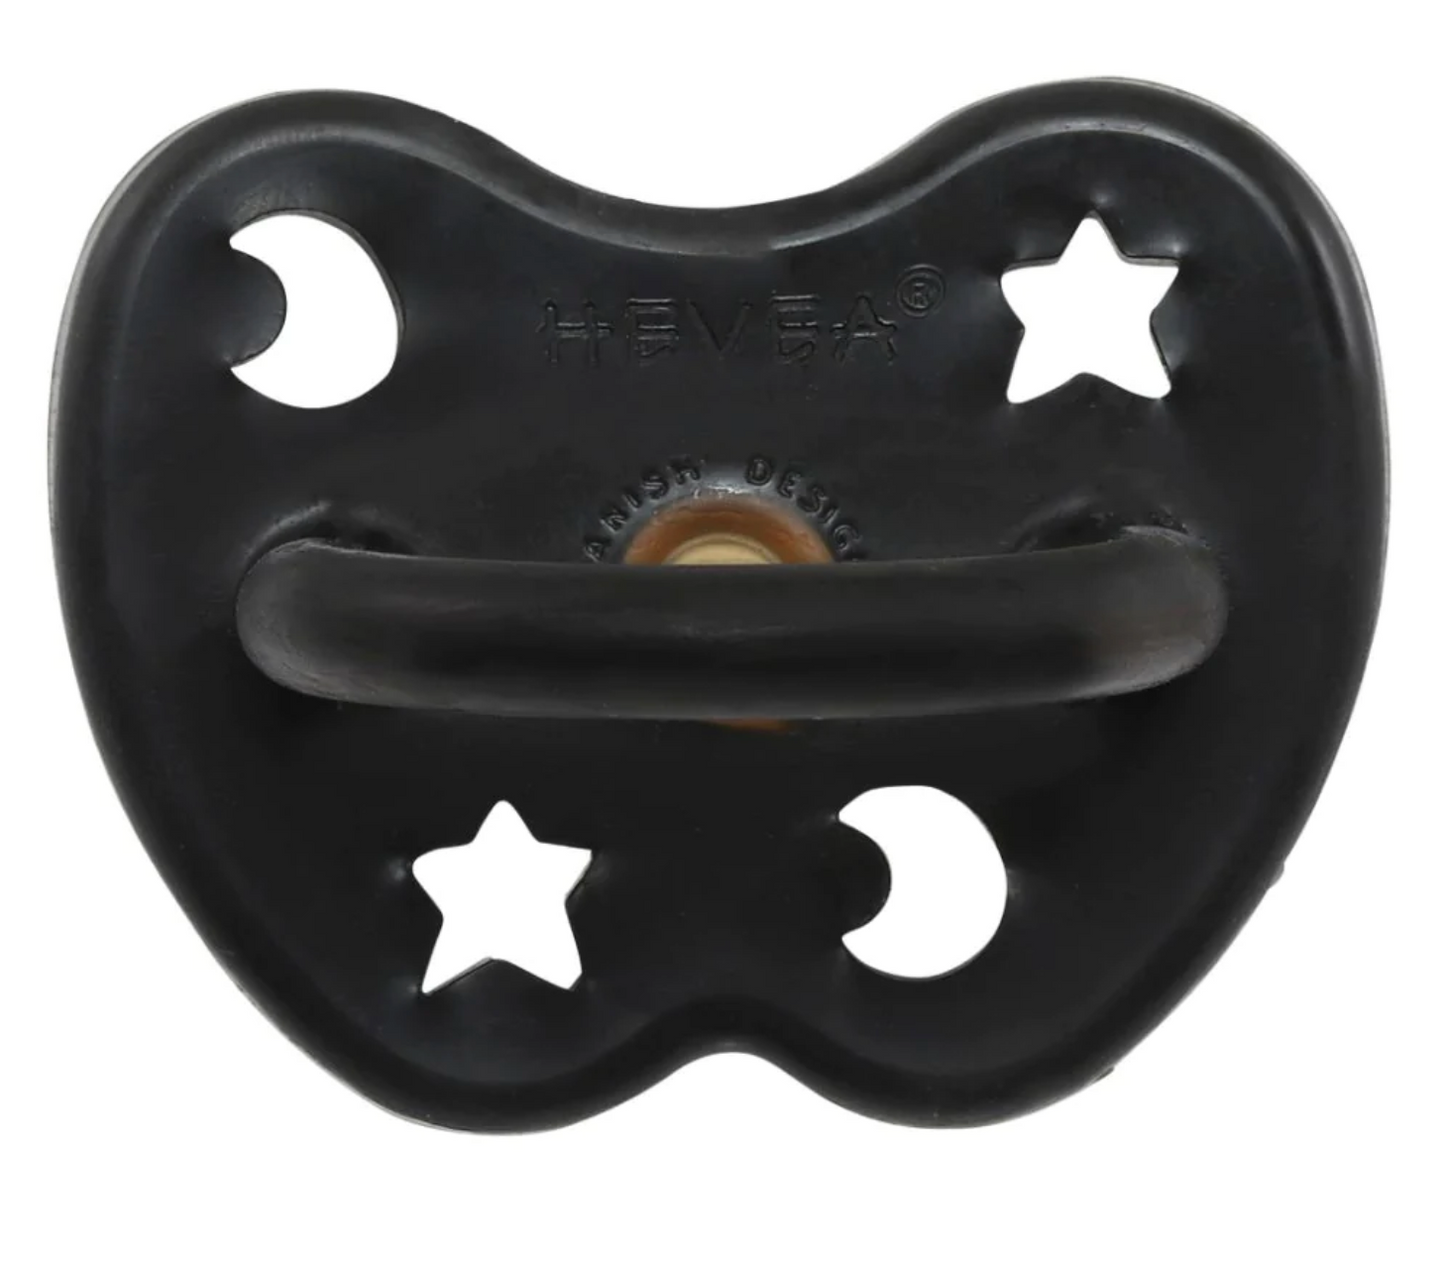 Hevea Pacifier Outer Space Black - 3-36 months